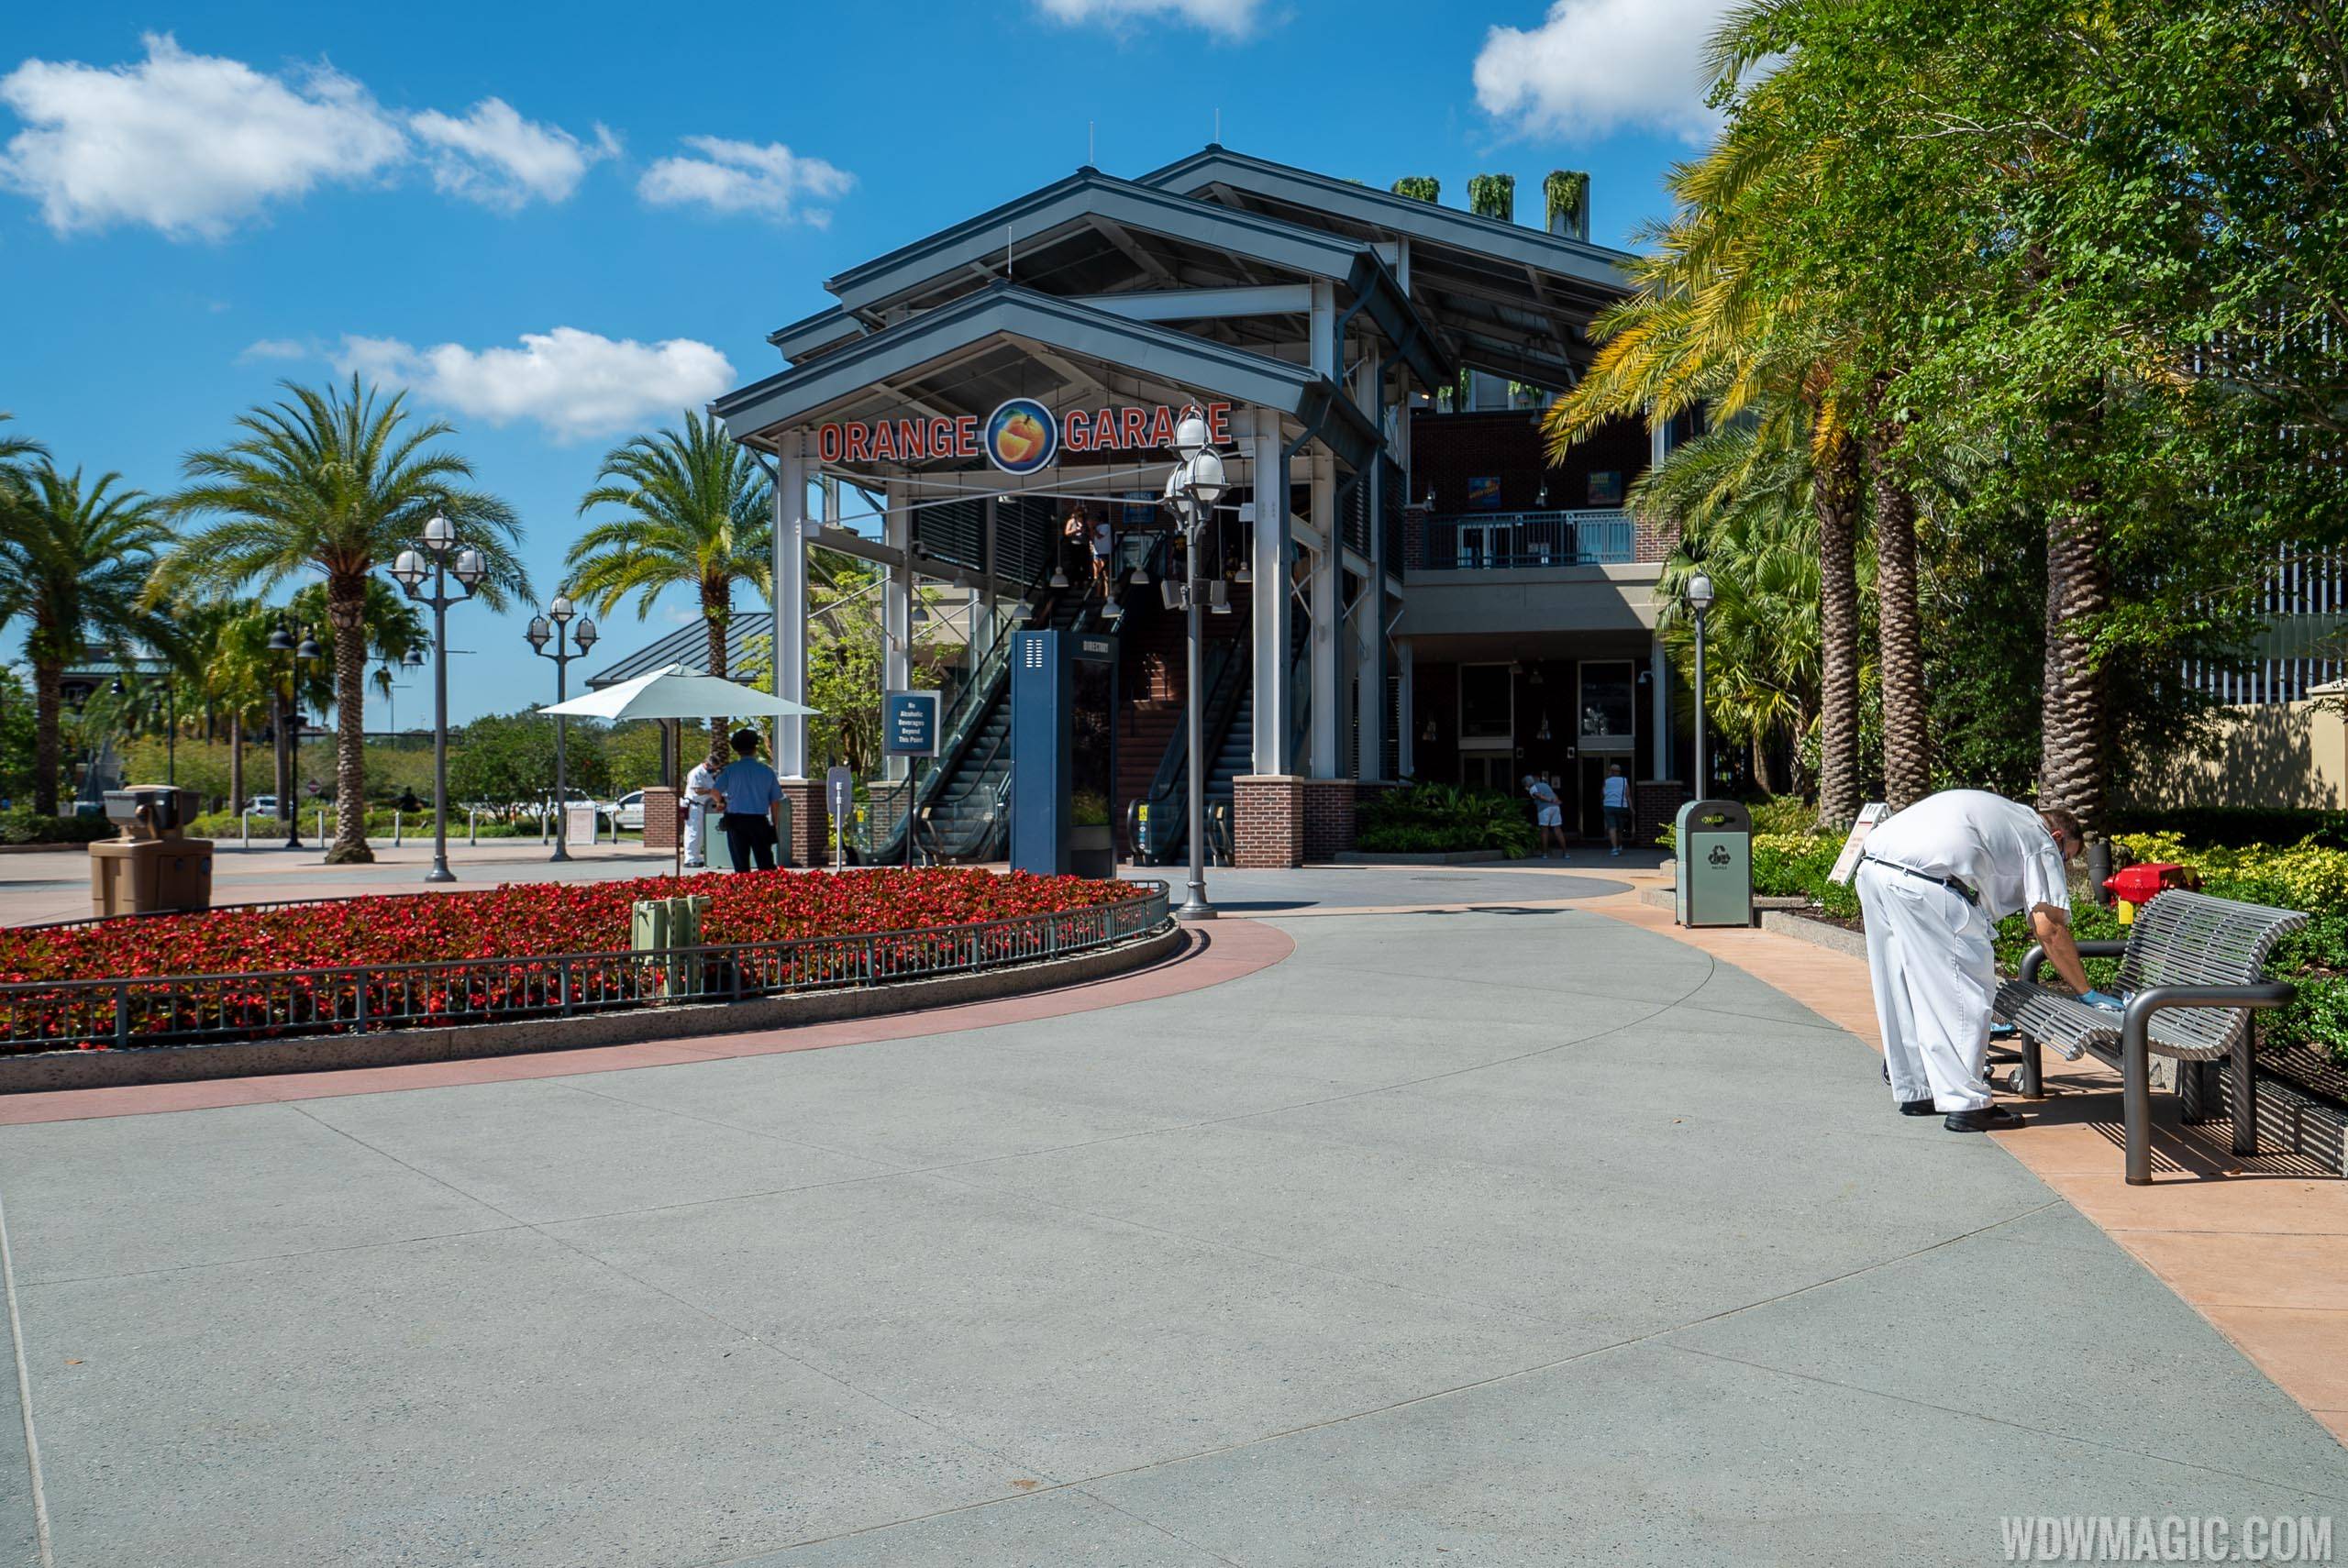 First day of Disney Springs reopening from COVID-19 shutdown